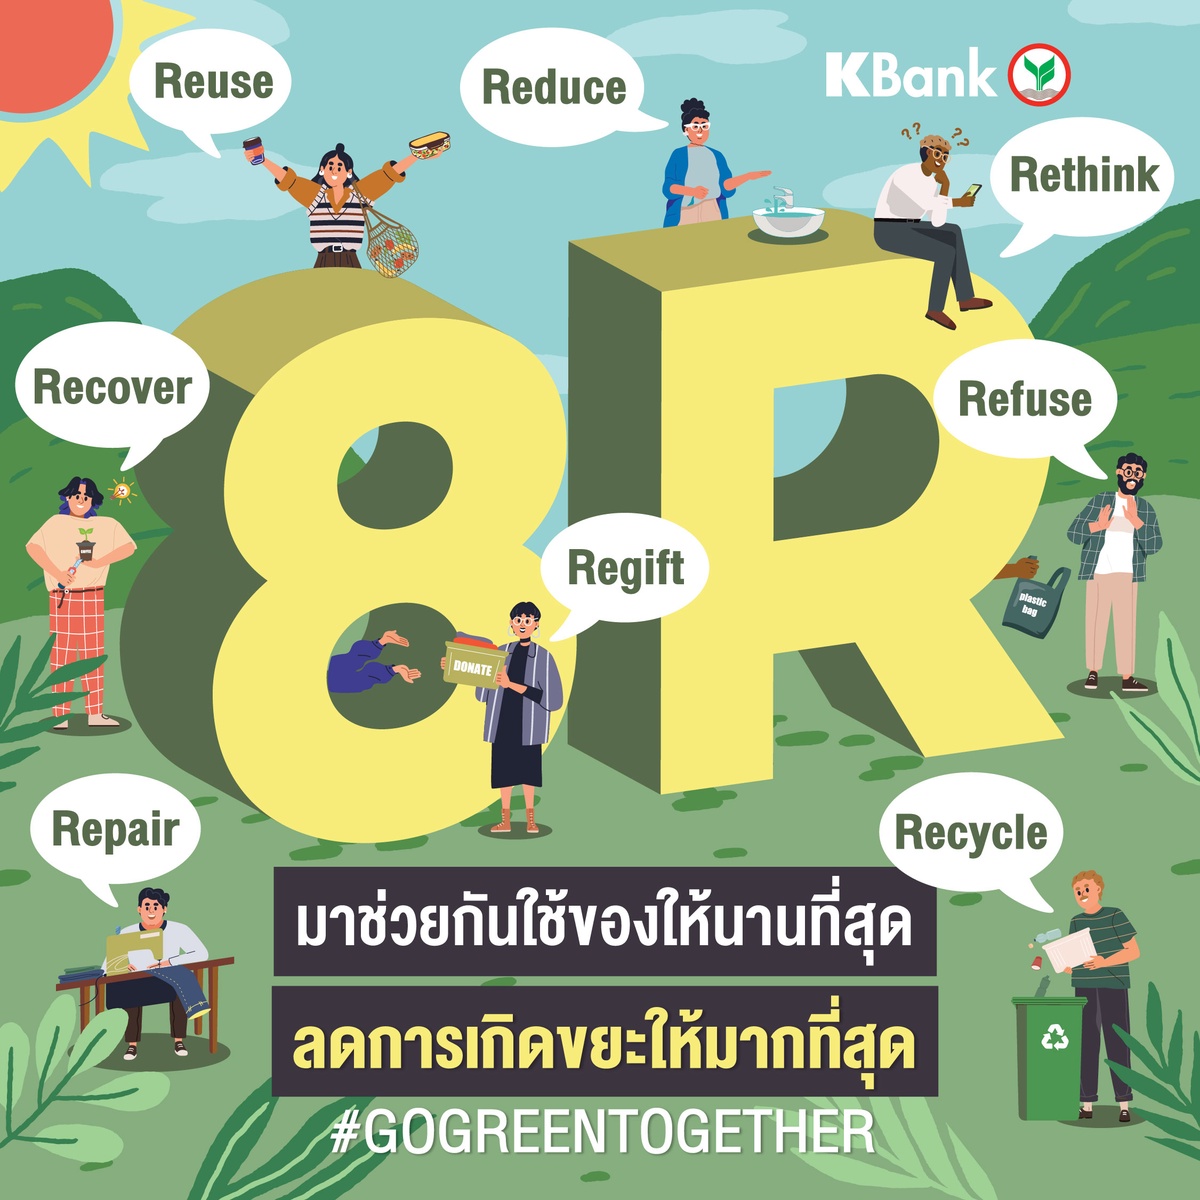 KBank invites all Thais to join the GO GREEN TOGETHER: Let's Unite to Fight Climate Change campaign by sharing a Going Green